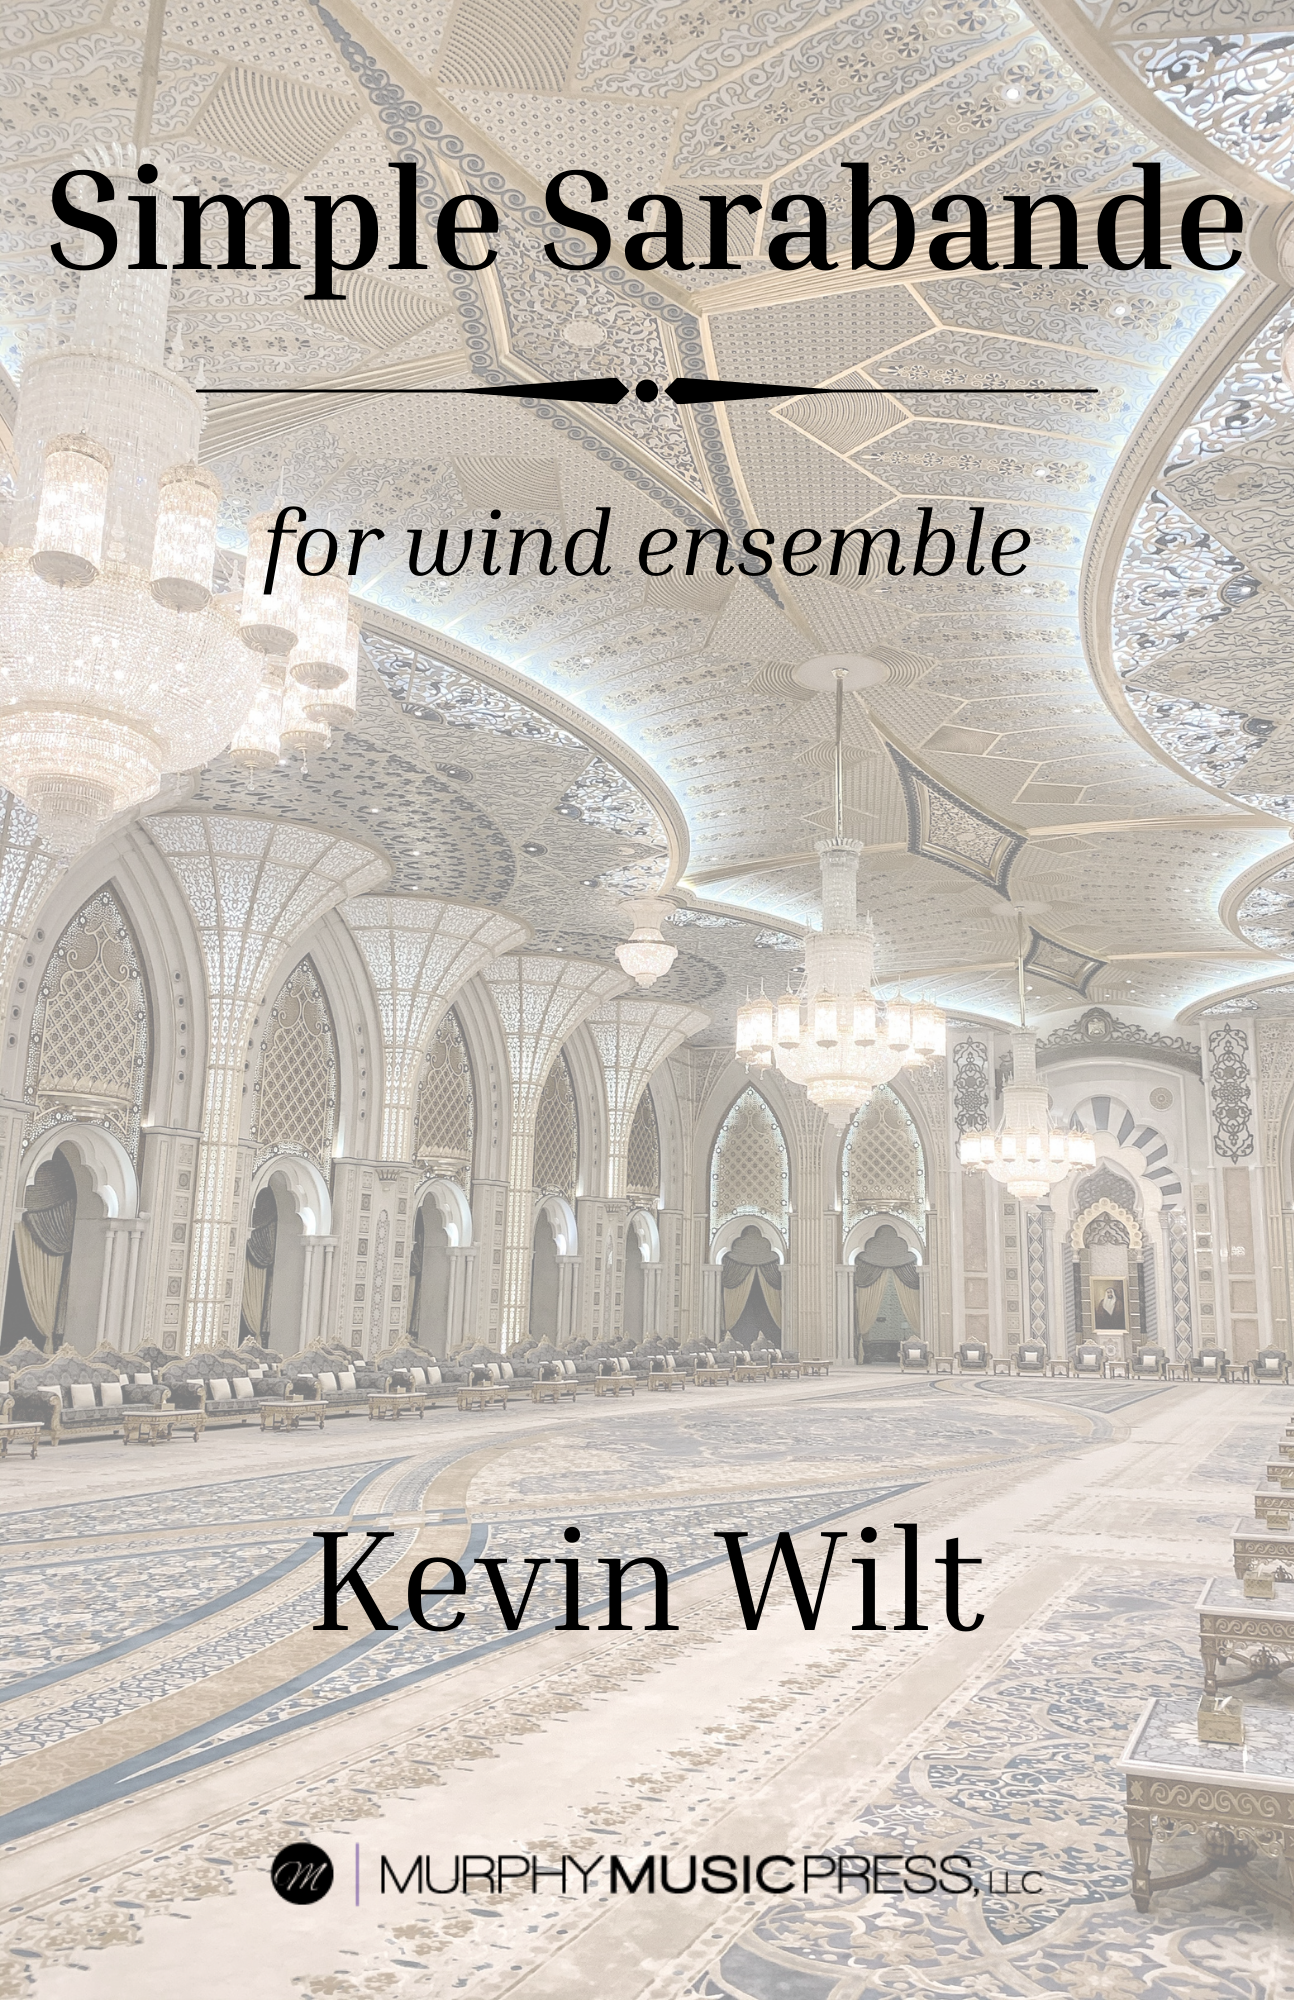 Simple Sarabande (Score Only) by Kevin Wilt